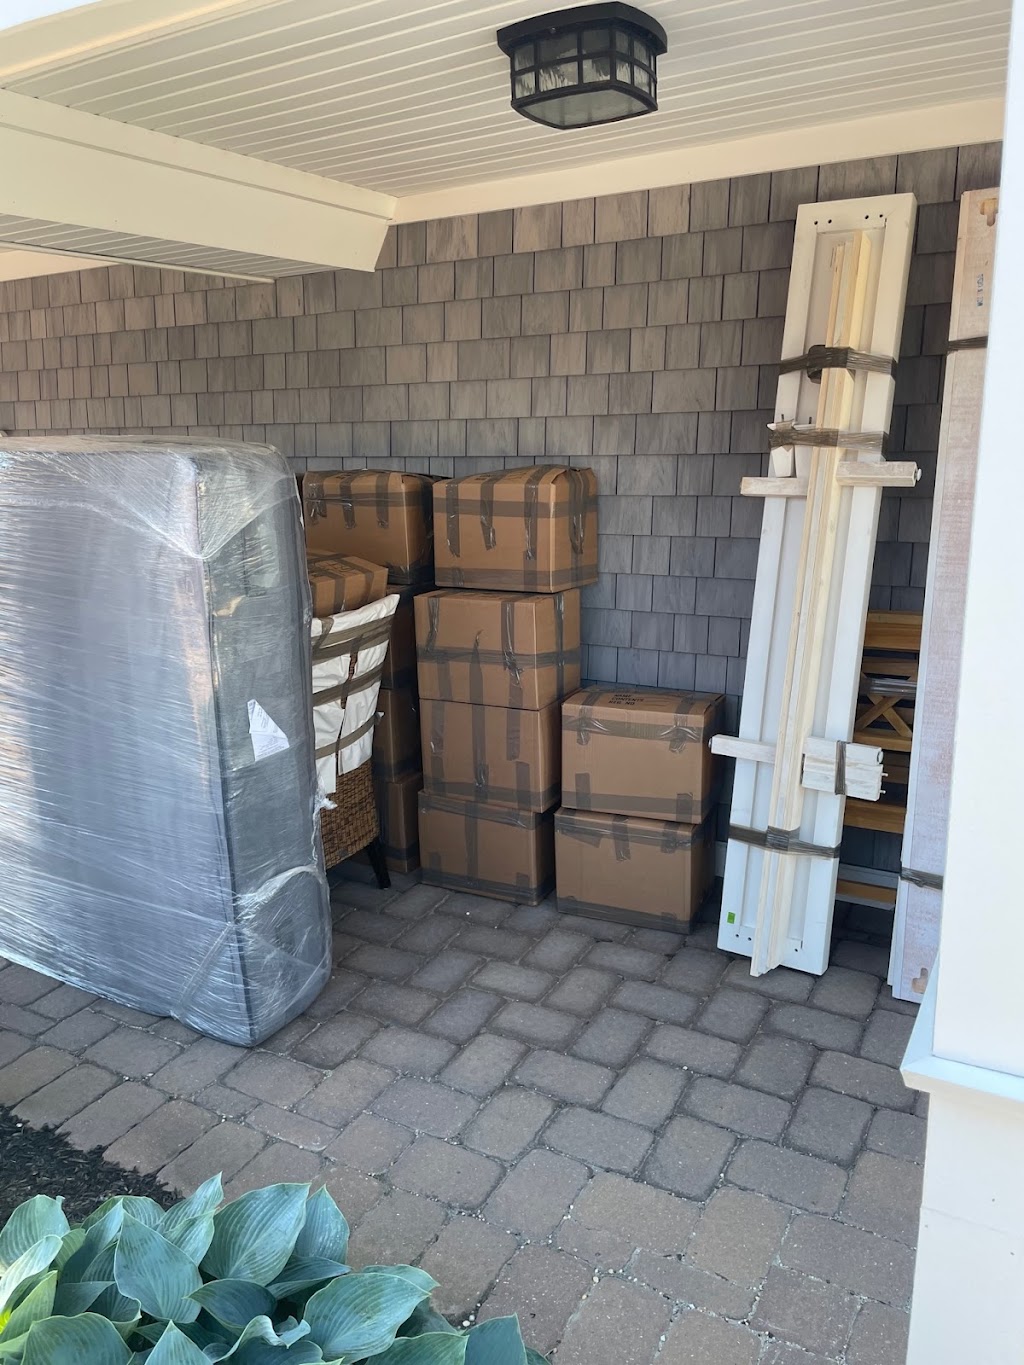 1st Moving Corp. | 1743 US 9 North, Howell Township, NJ 07731, USA | Phone: (732) 414-2727